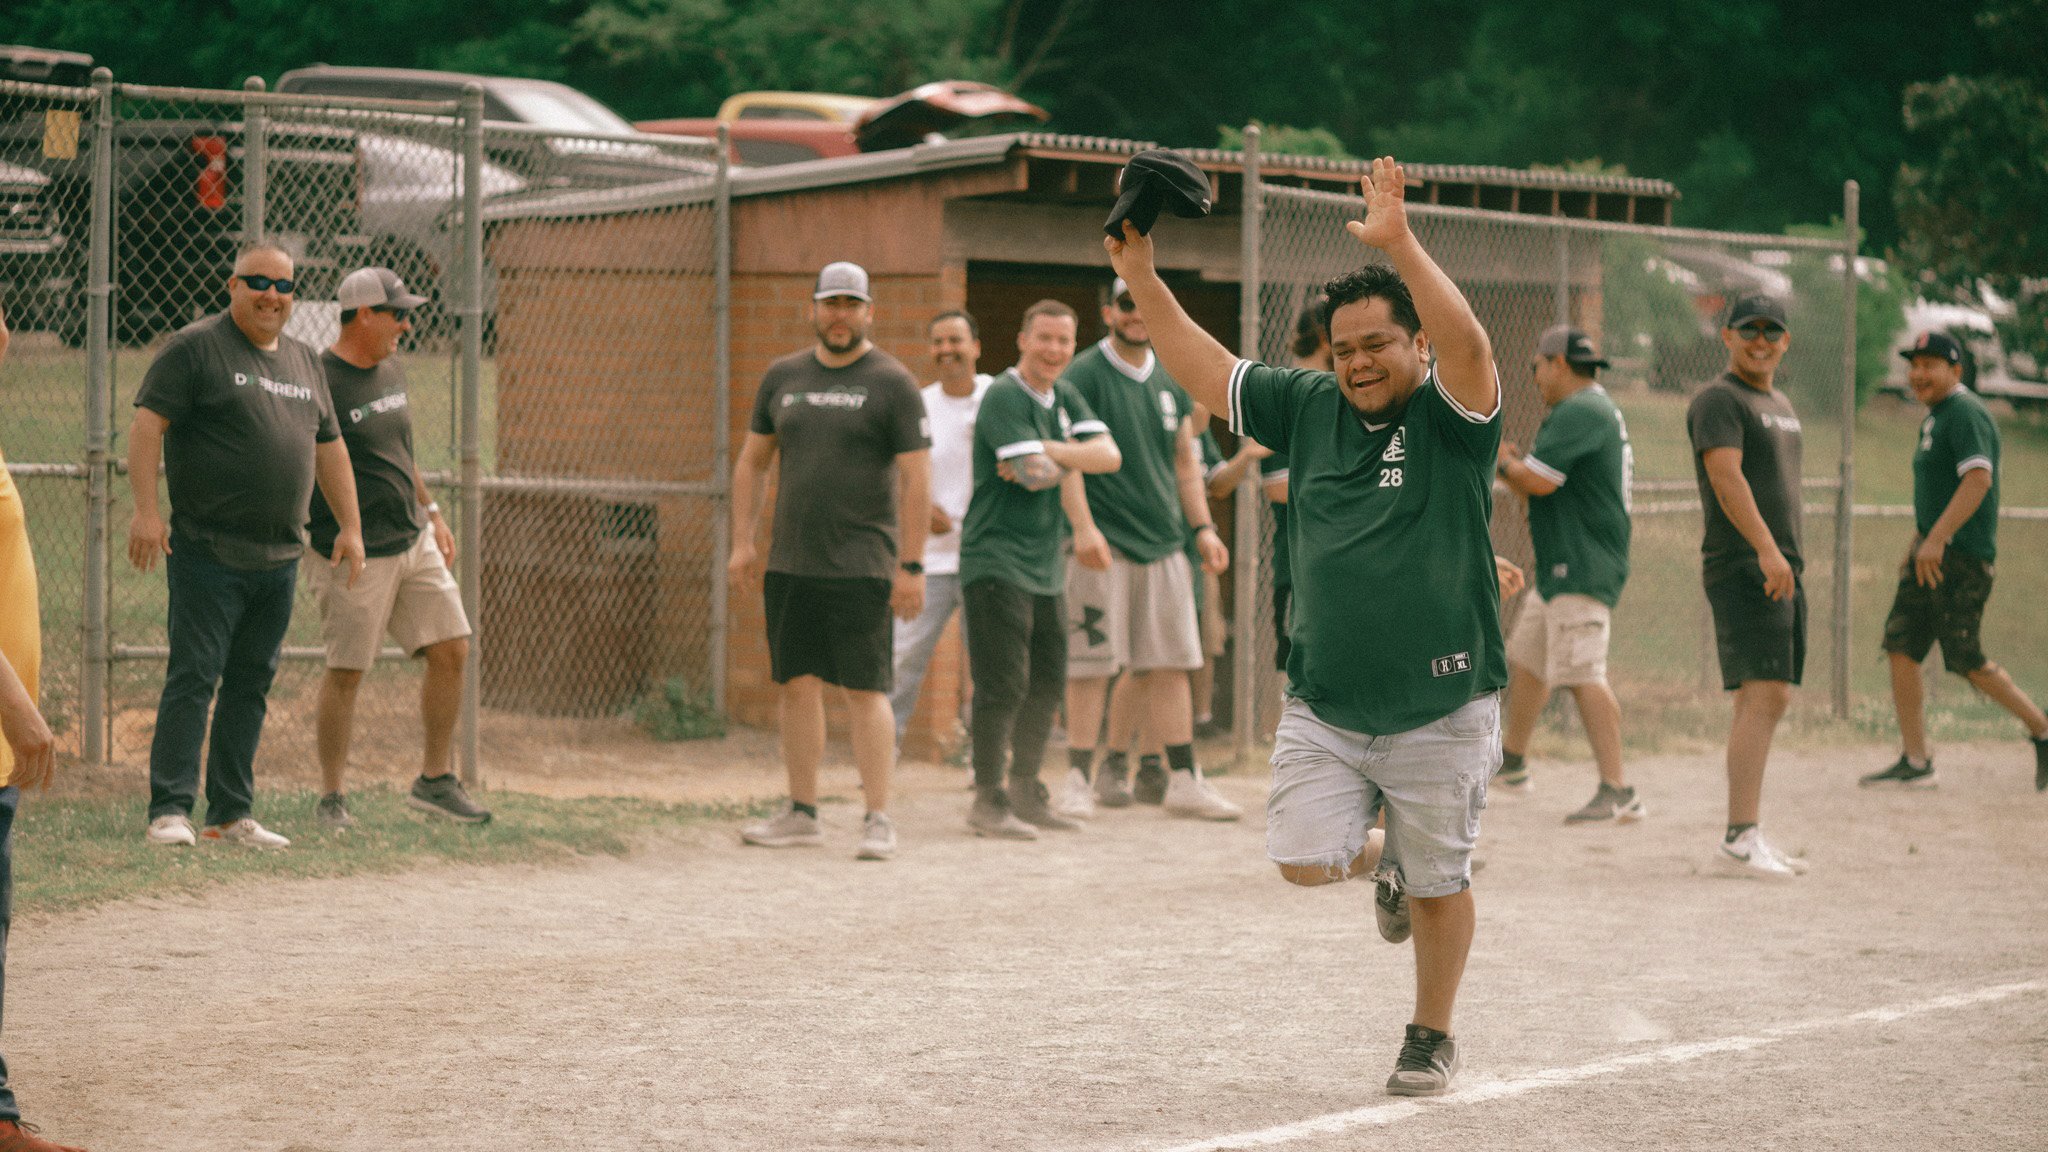 A company baseball game with a person running with their hands in the air